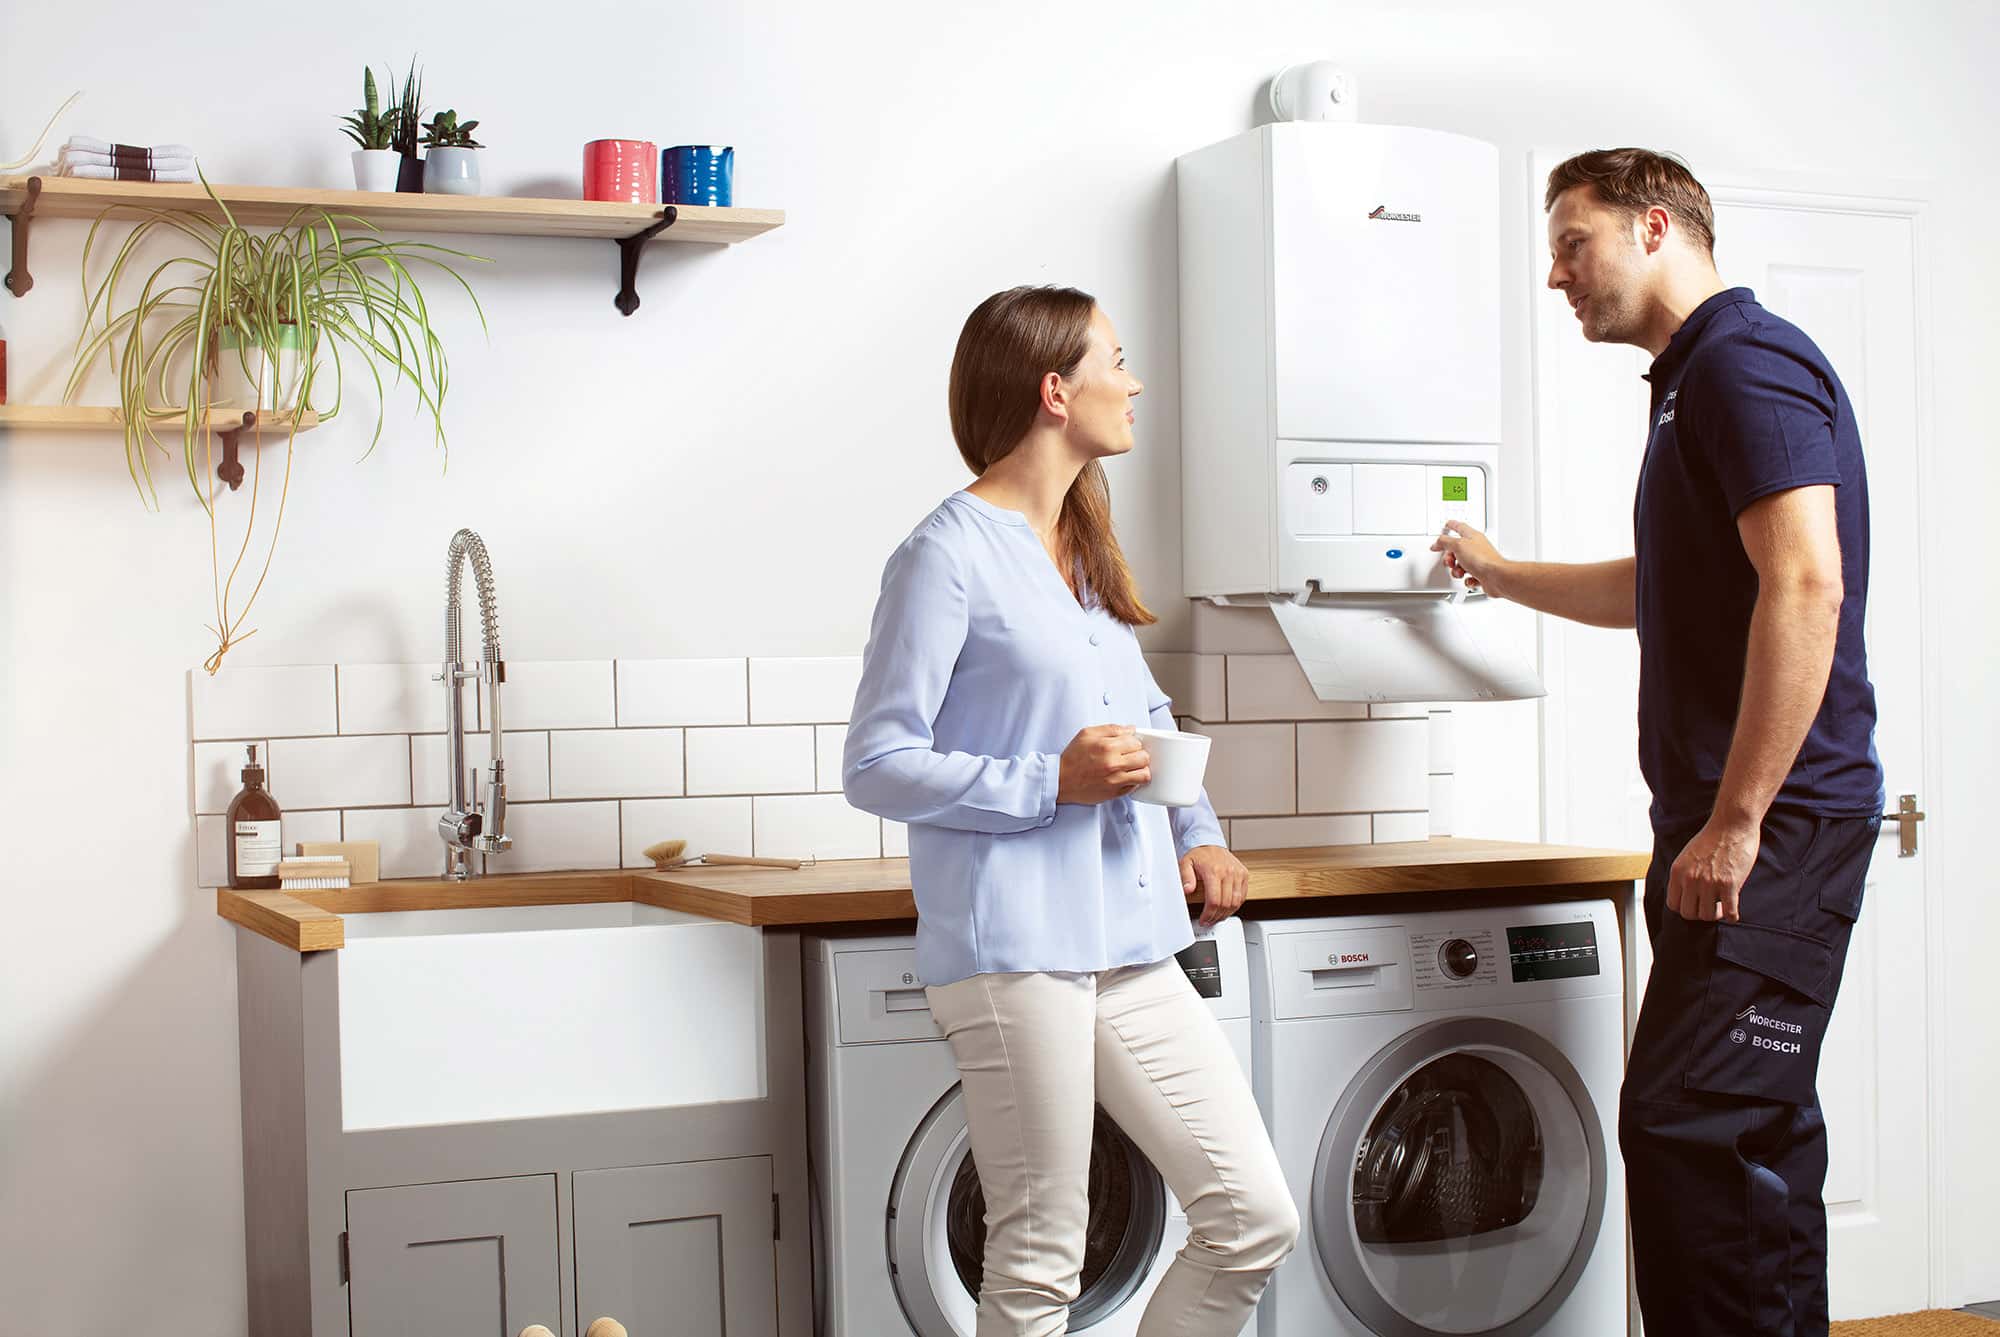 How to take care of your boiler at home